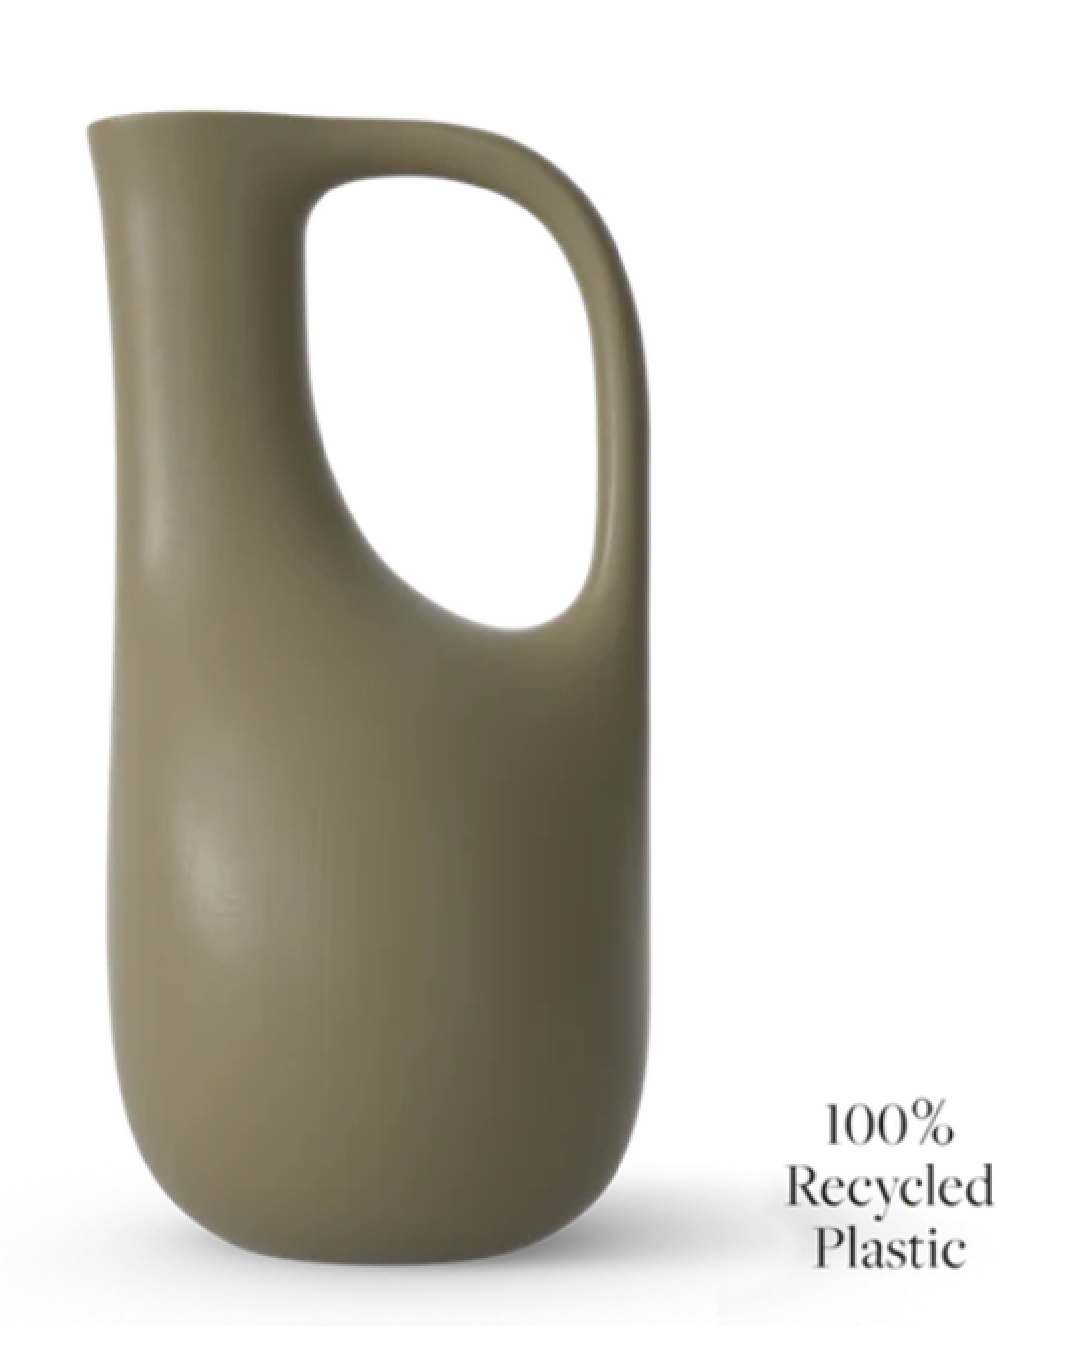 Liba watering can in olive